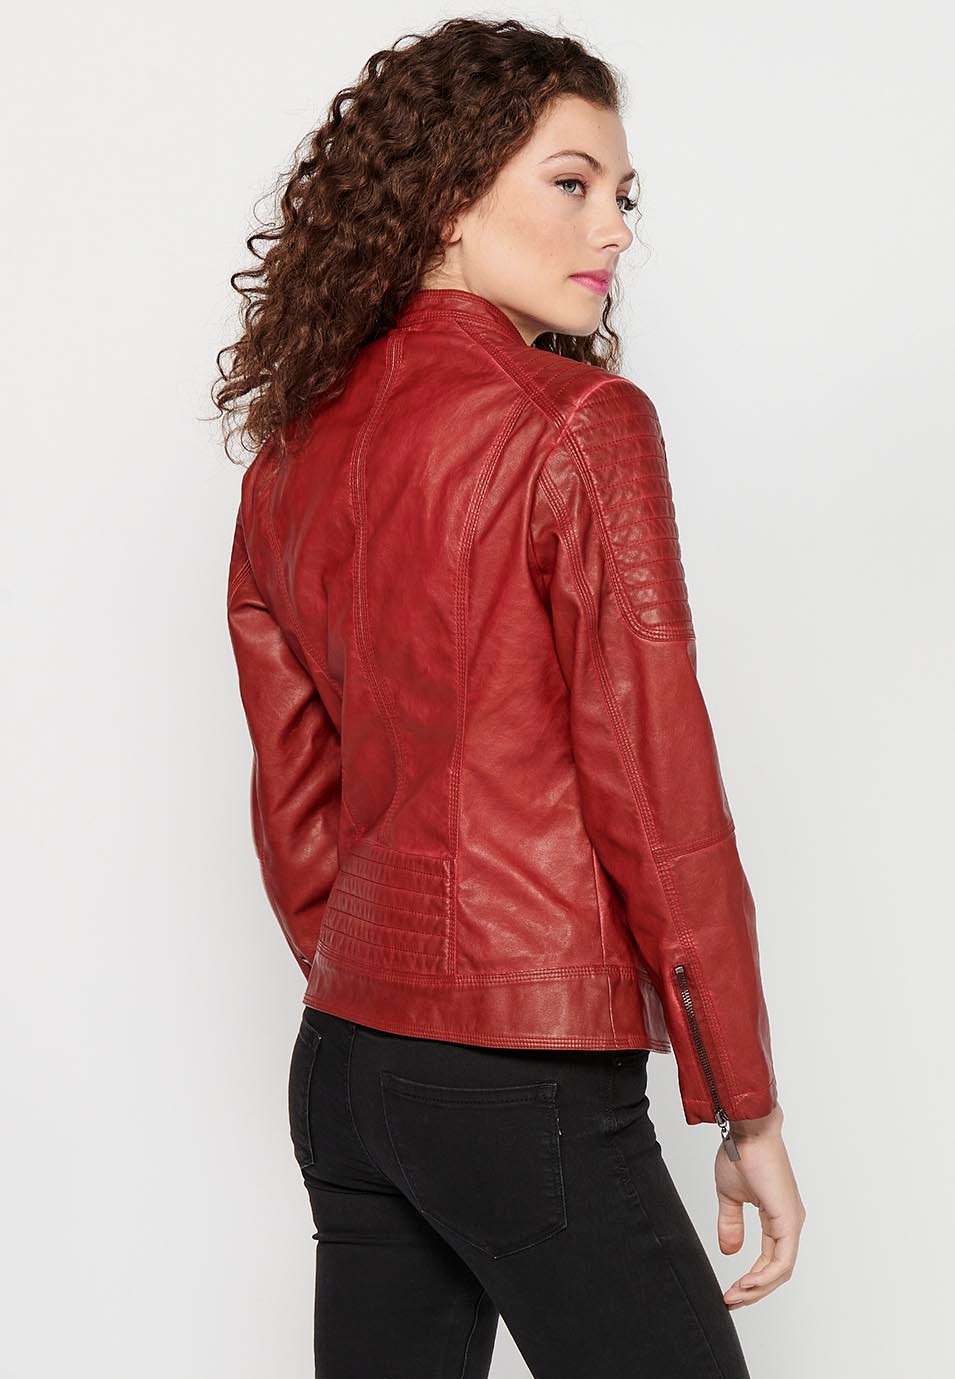 Women's Red Long Sleeve Round Neck Zipper Front Closure Jacket 10